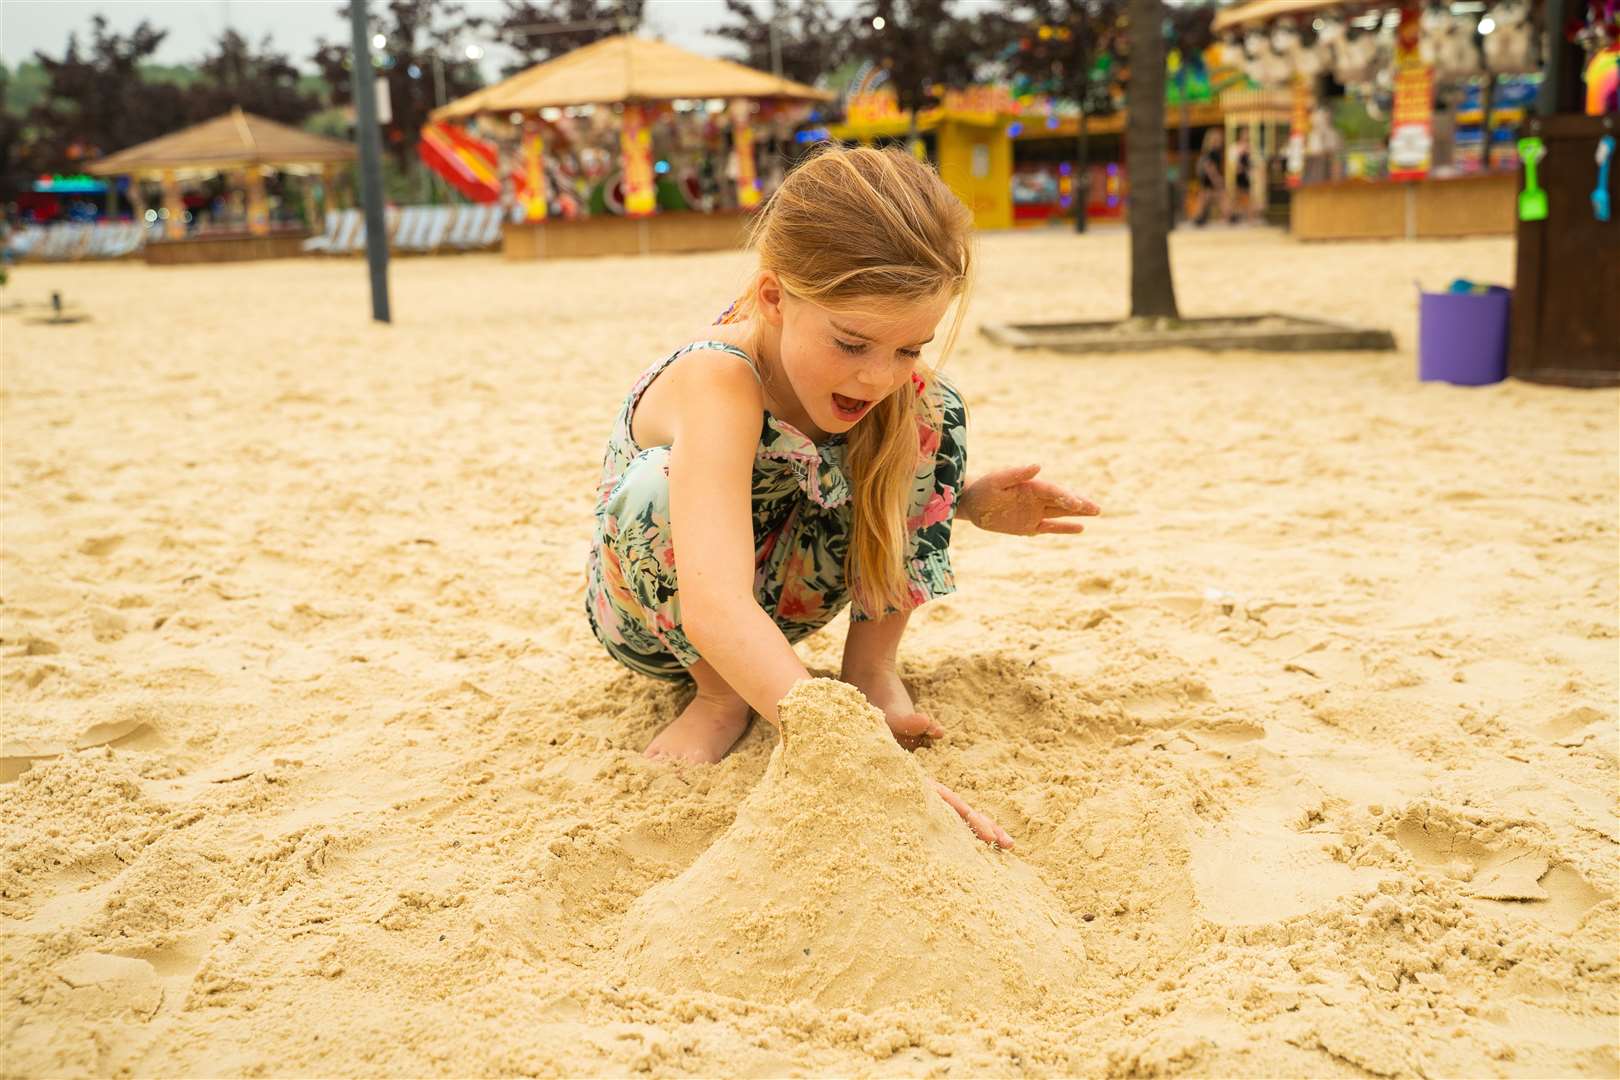 The Beach at Bluewater returns this summer. Picture: Bluewater (58286120)